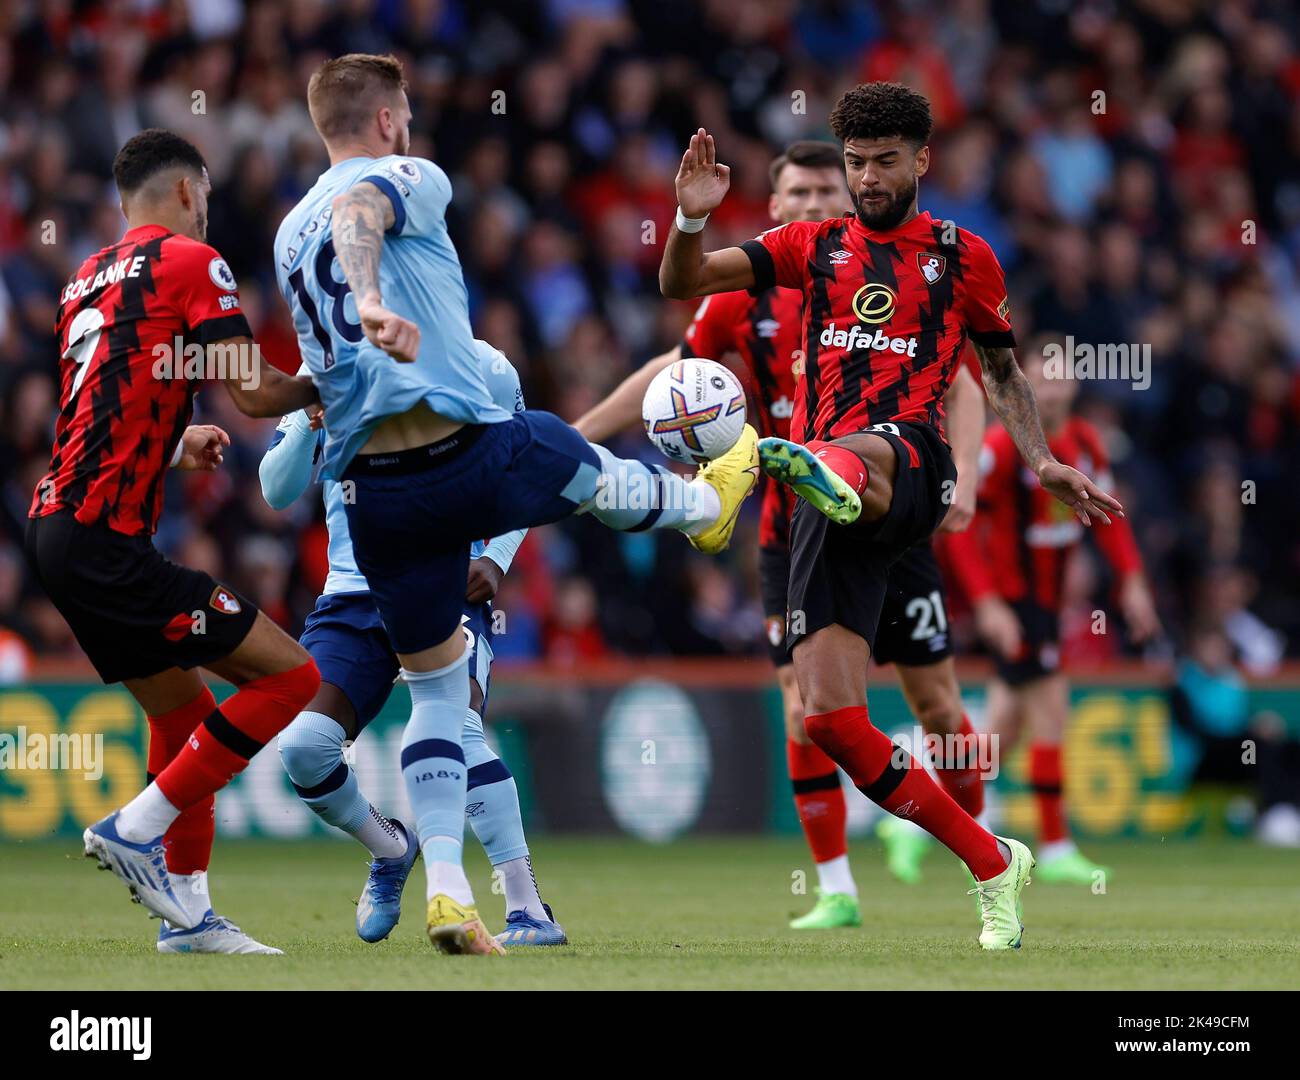 Bournemouth's Philip Billing (right) and Brentford's Pontus Jansson battle for the ball during the Premier League match at the Vitality Stadium, Bournemouth. Picture date: Saturday October 1, 2022. Stock Photo